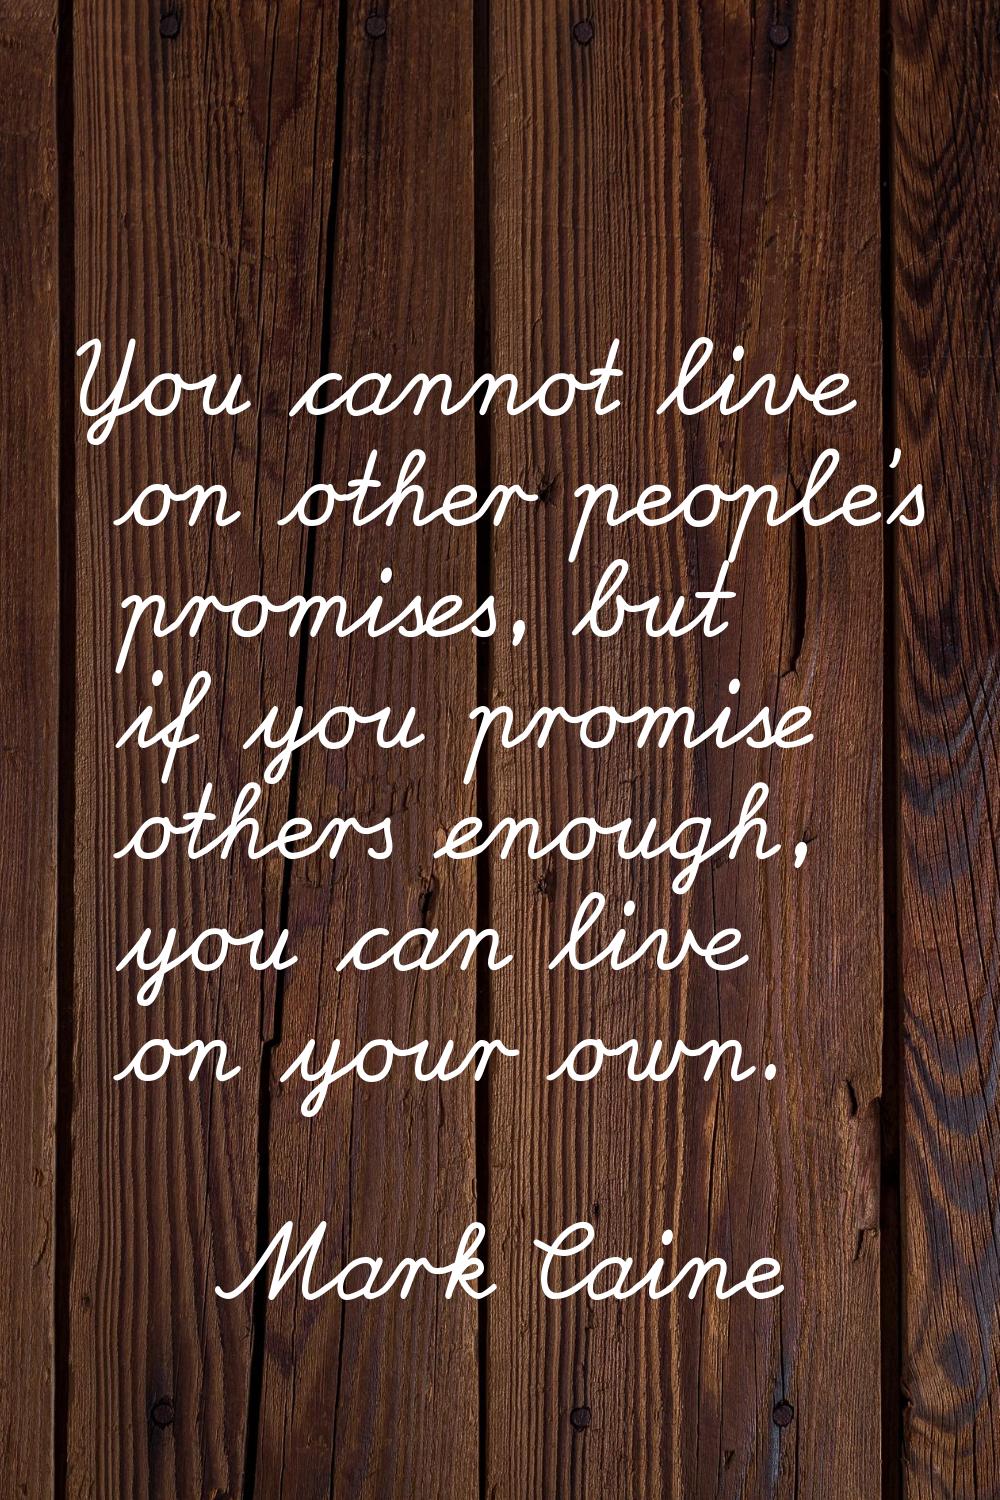 You cannot live on other people's promises, but if you promise others enough, you can live on your 